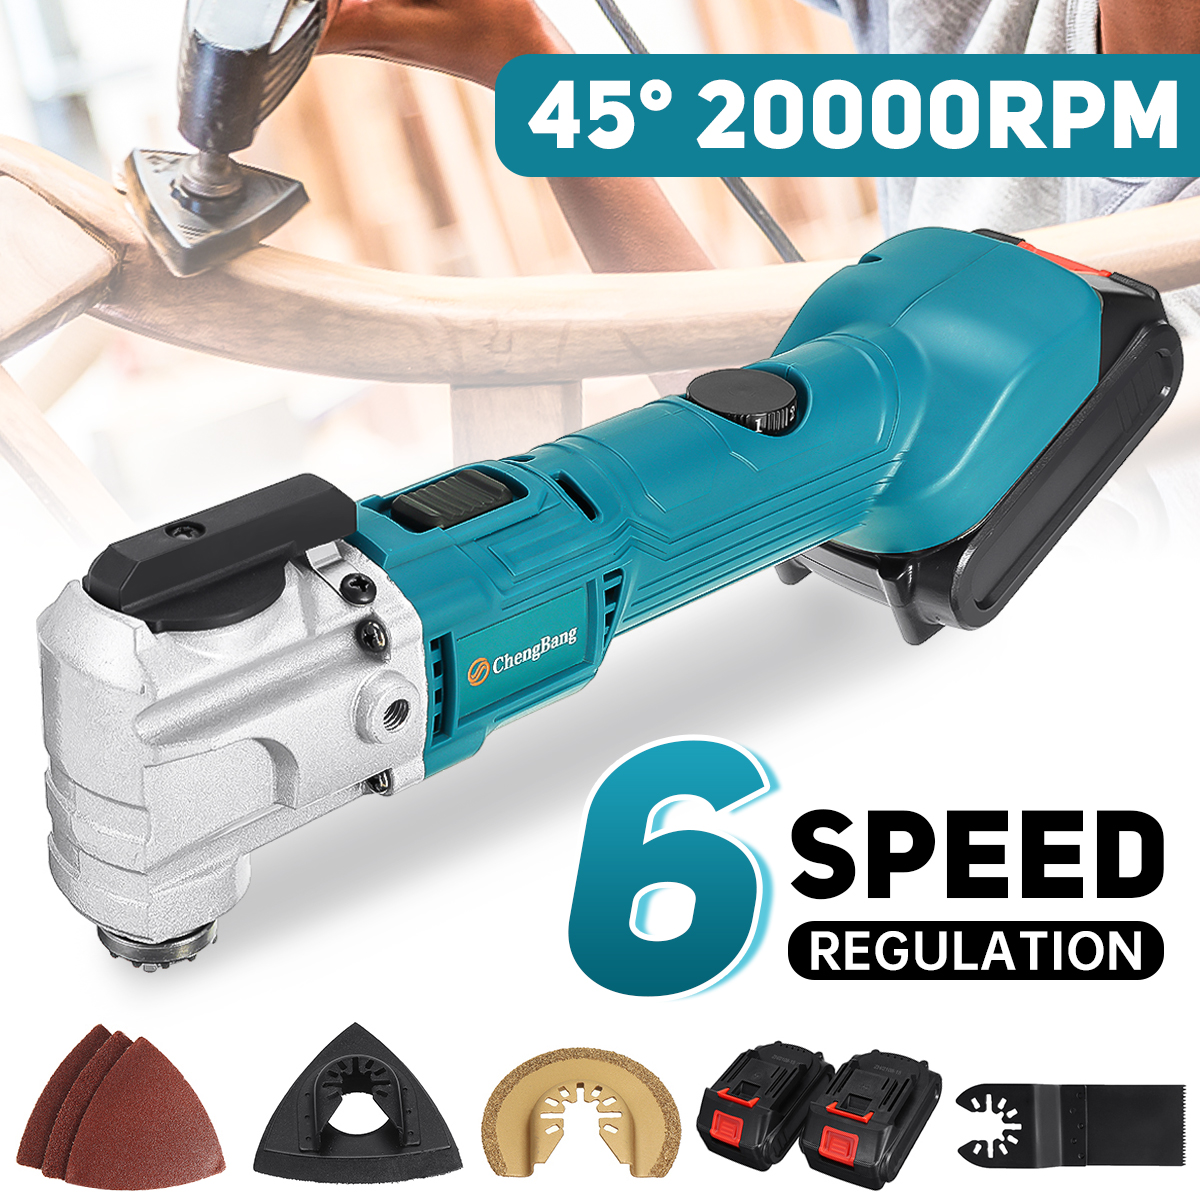 25mm-6-Speed-Brushless-Rechargeable-Angle-Grinder-Cordless-Electric-Grinder-Polishing-Machine-Oscill-1914411-1